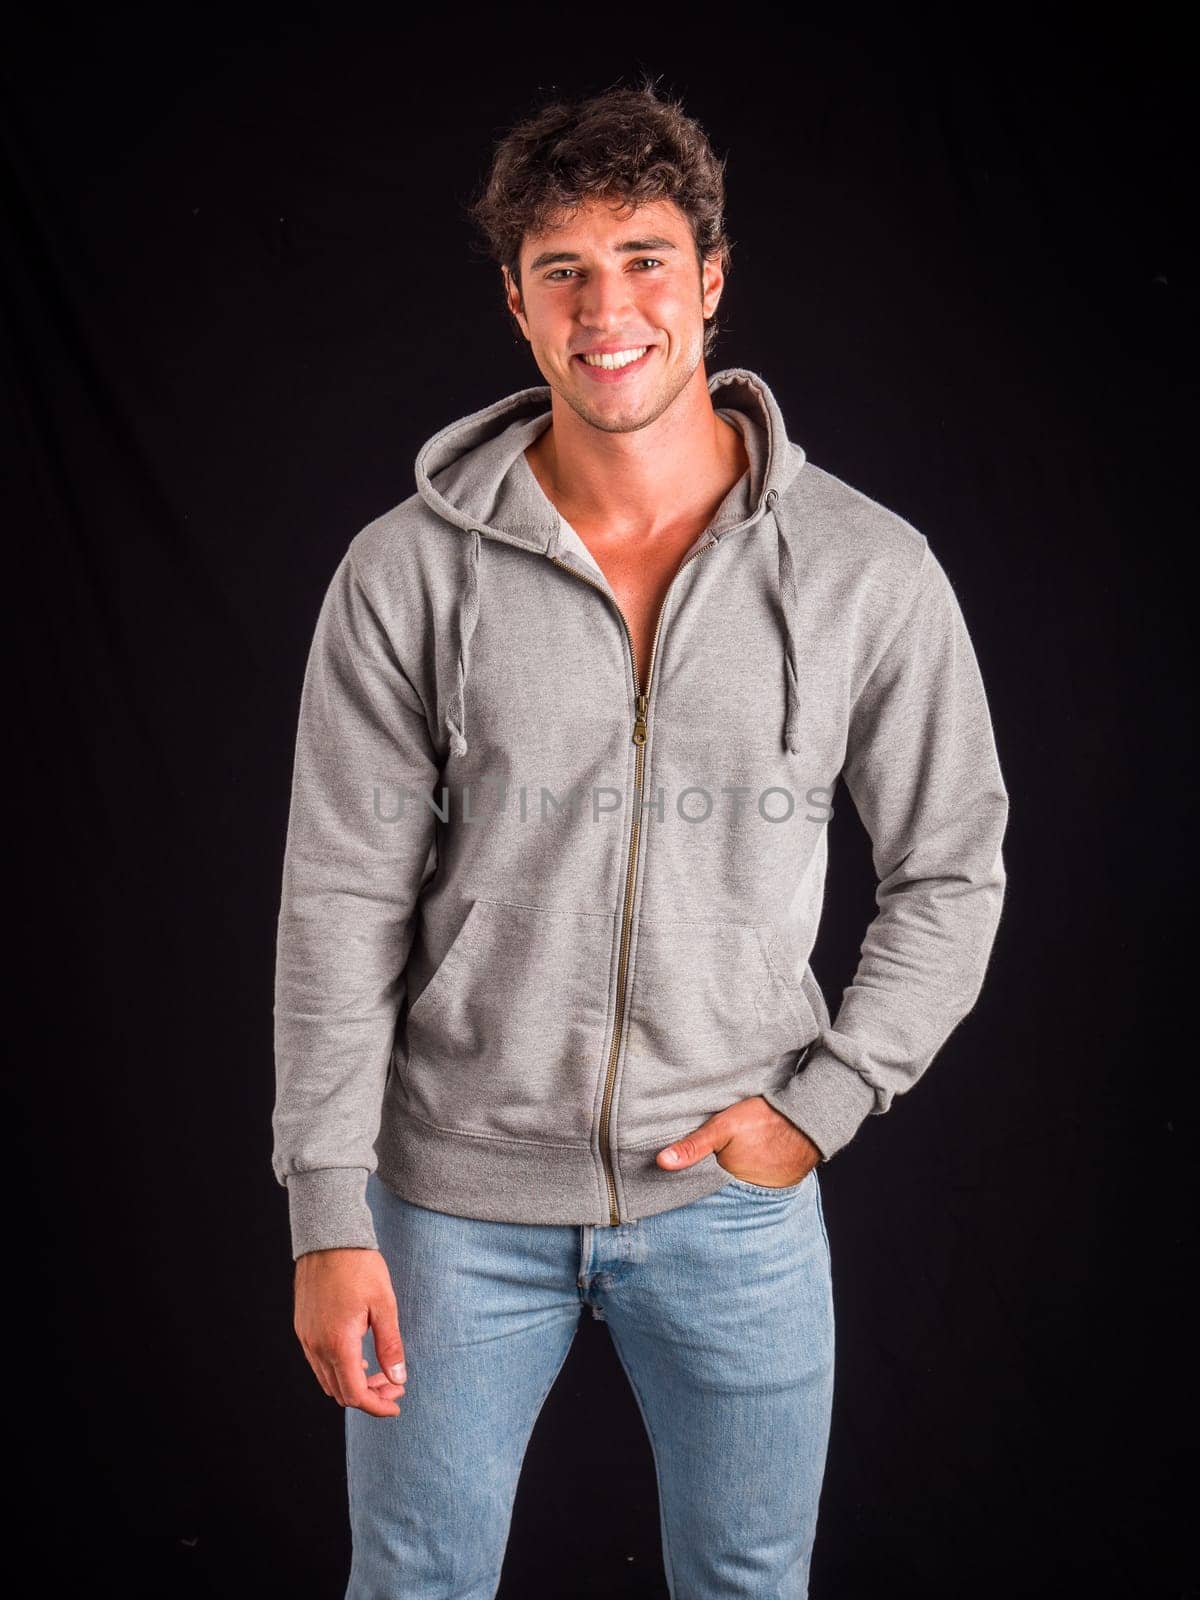 Photo of a man in a gray hoodie posing for a picture by artofphoto